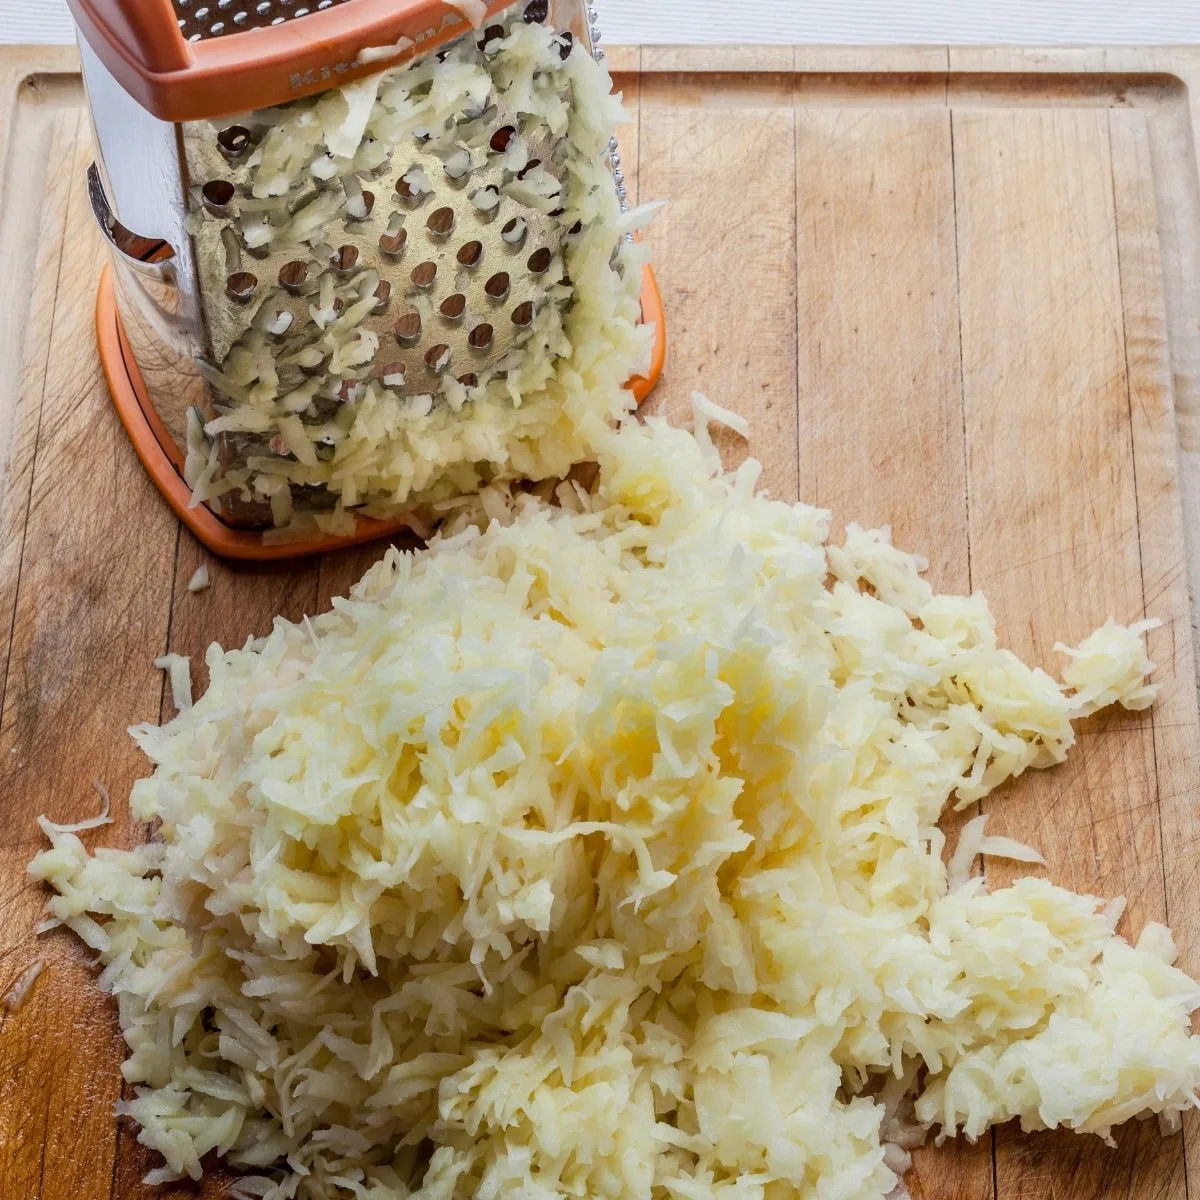 Grated potato on a cutting board